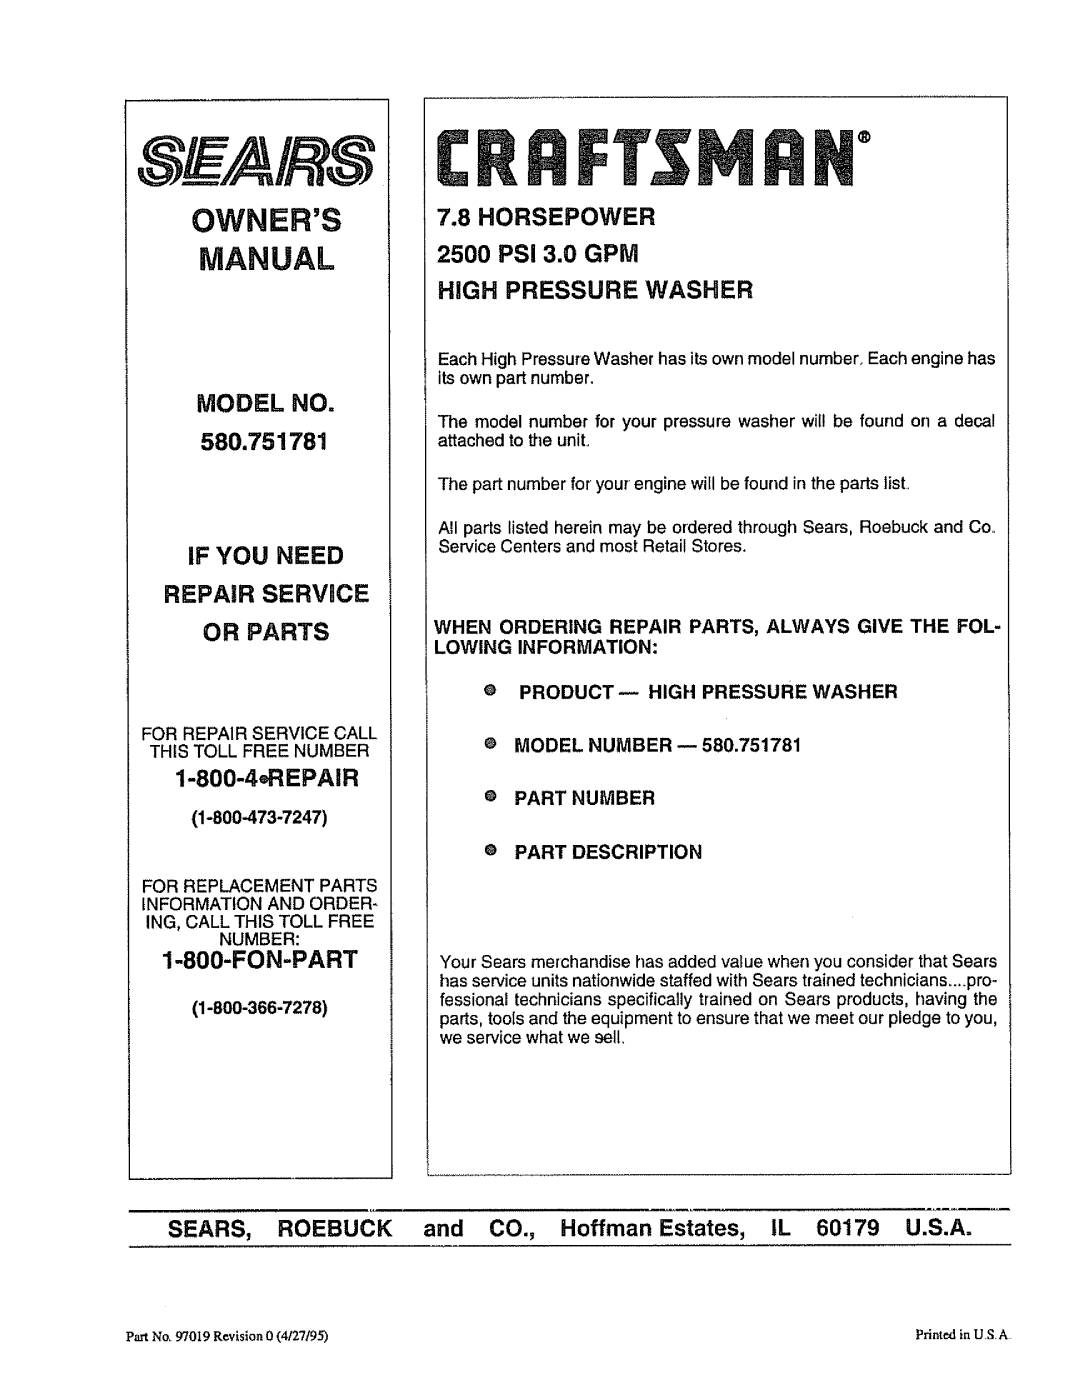 Craftsman 580.751781 If You Need Repair Service Or Parts, 1-800-4, EPAIR, Fon-Part, HORSEPOWER 2500 PSi 3.0 GPM, Model No 